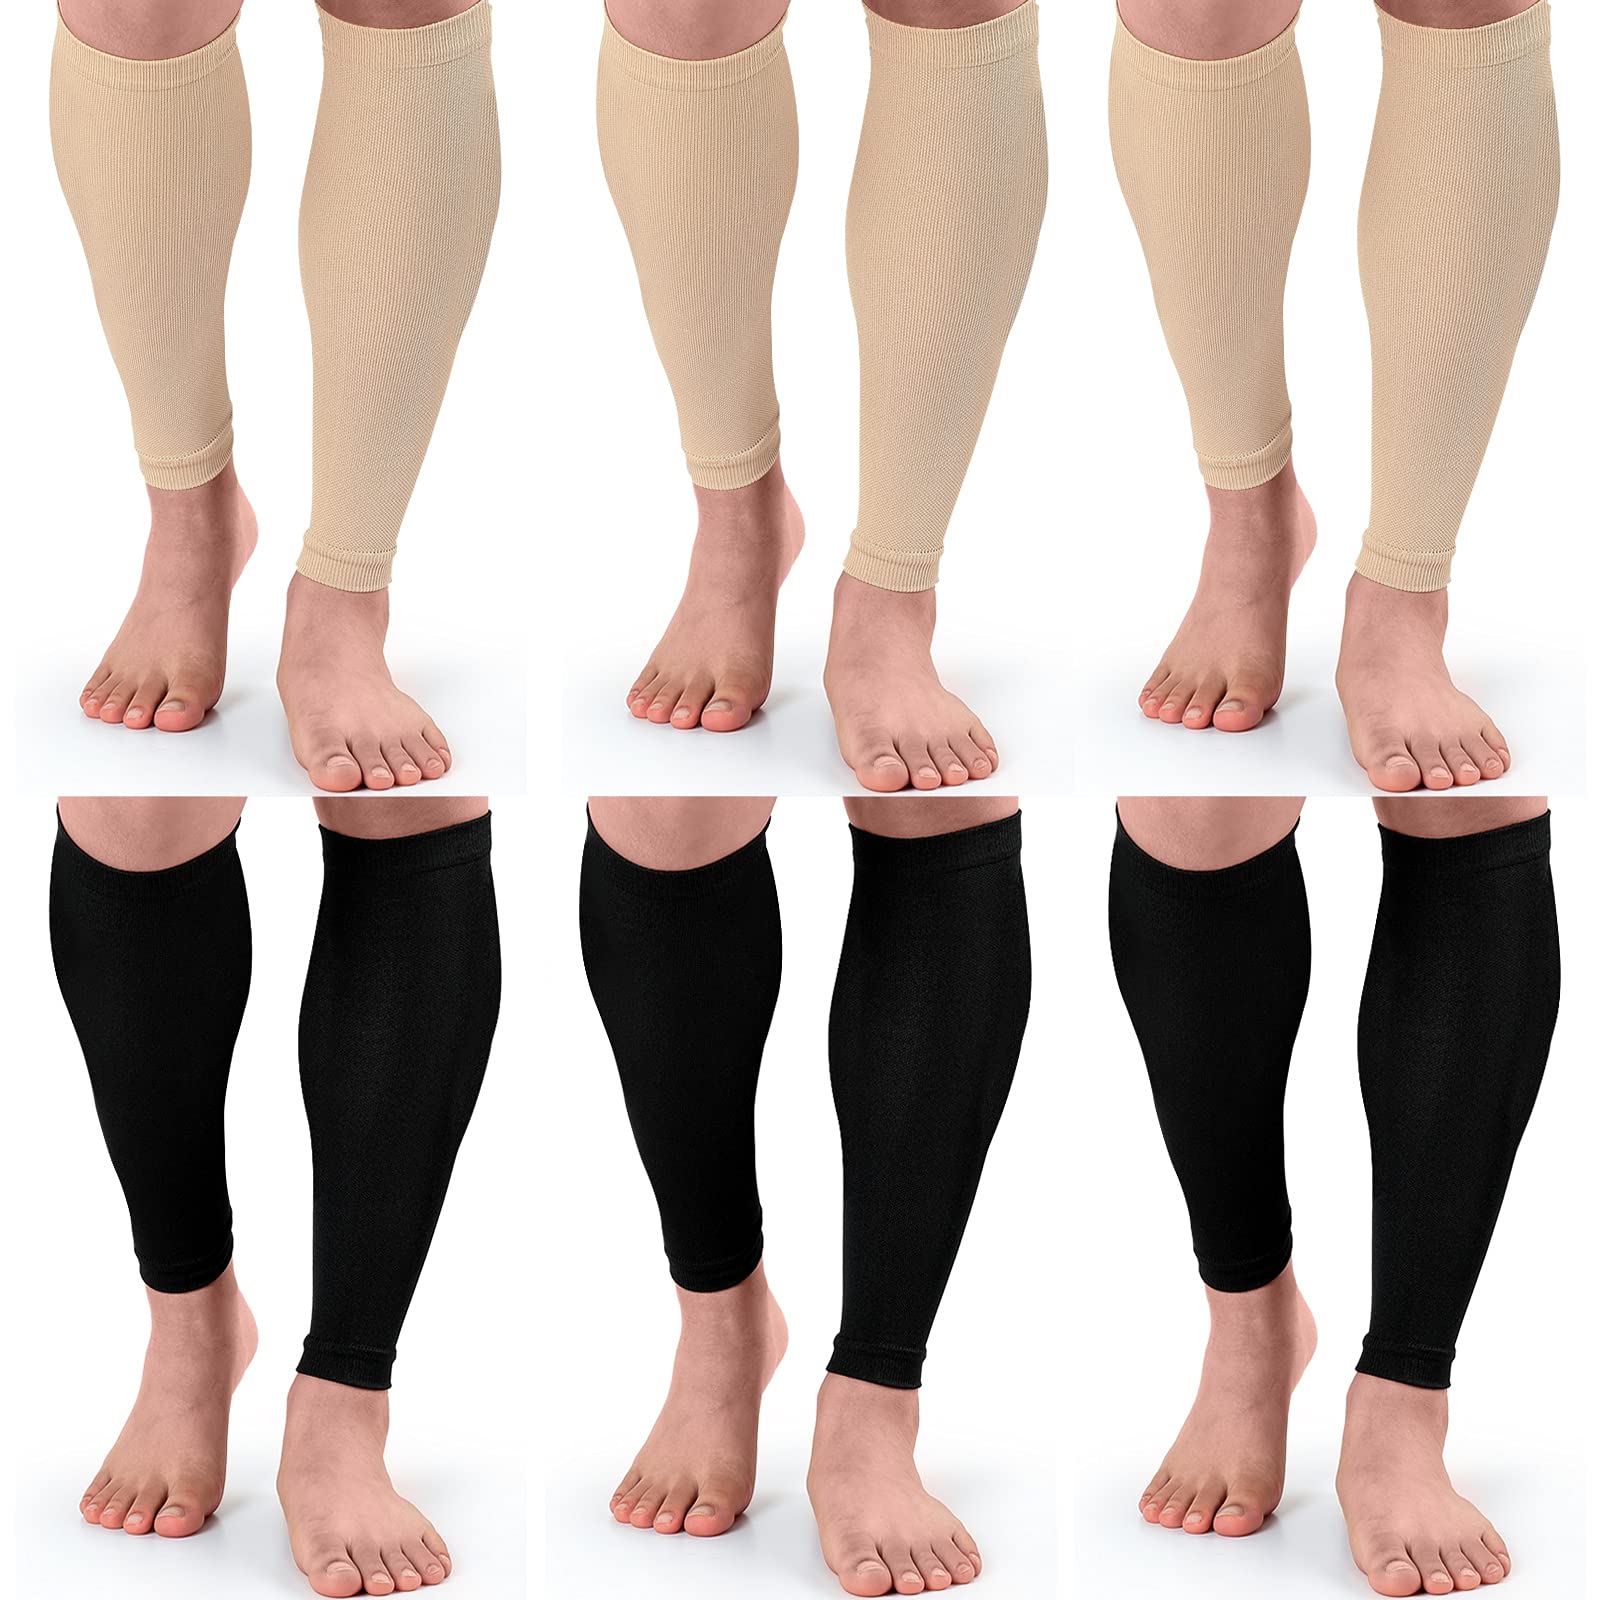 Coume 6 Pairs Leg Compression Sleeves Calf Compression Socks for